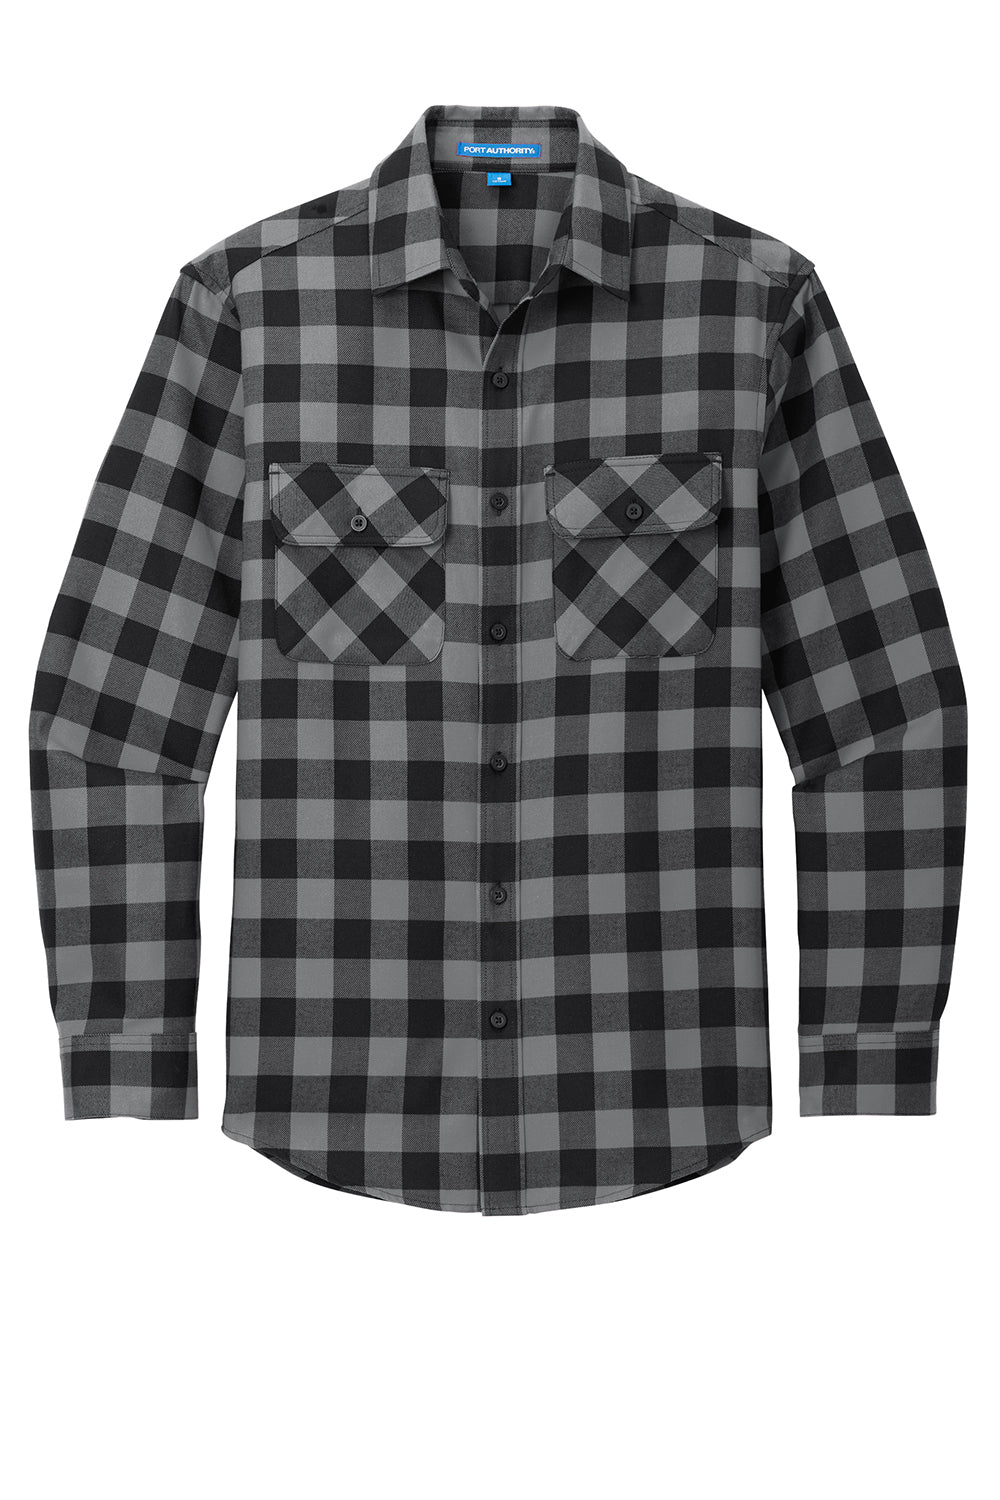 Port Authority W668 Mens Flannel Long Sleeve Button Down Shirt w/ Double Pockets Grey/Black Buffalo Flat Front